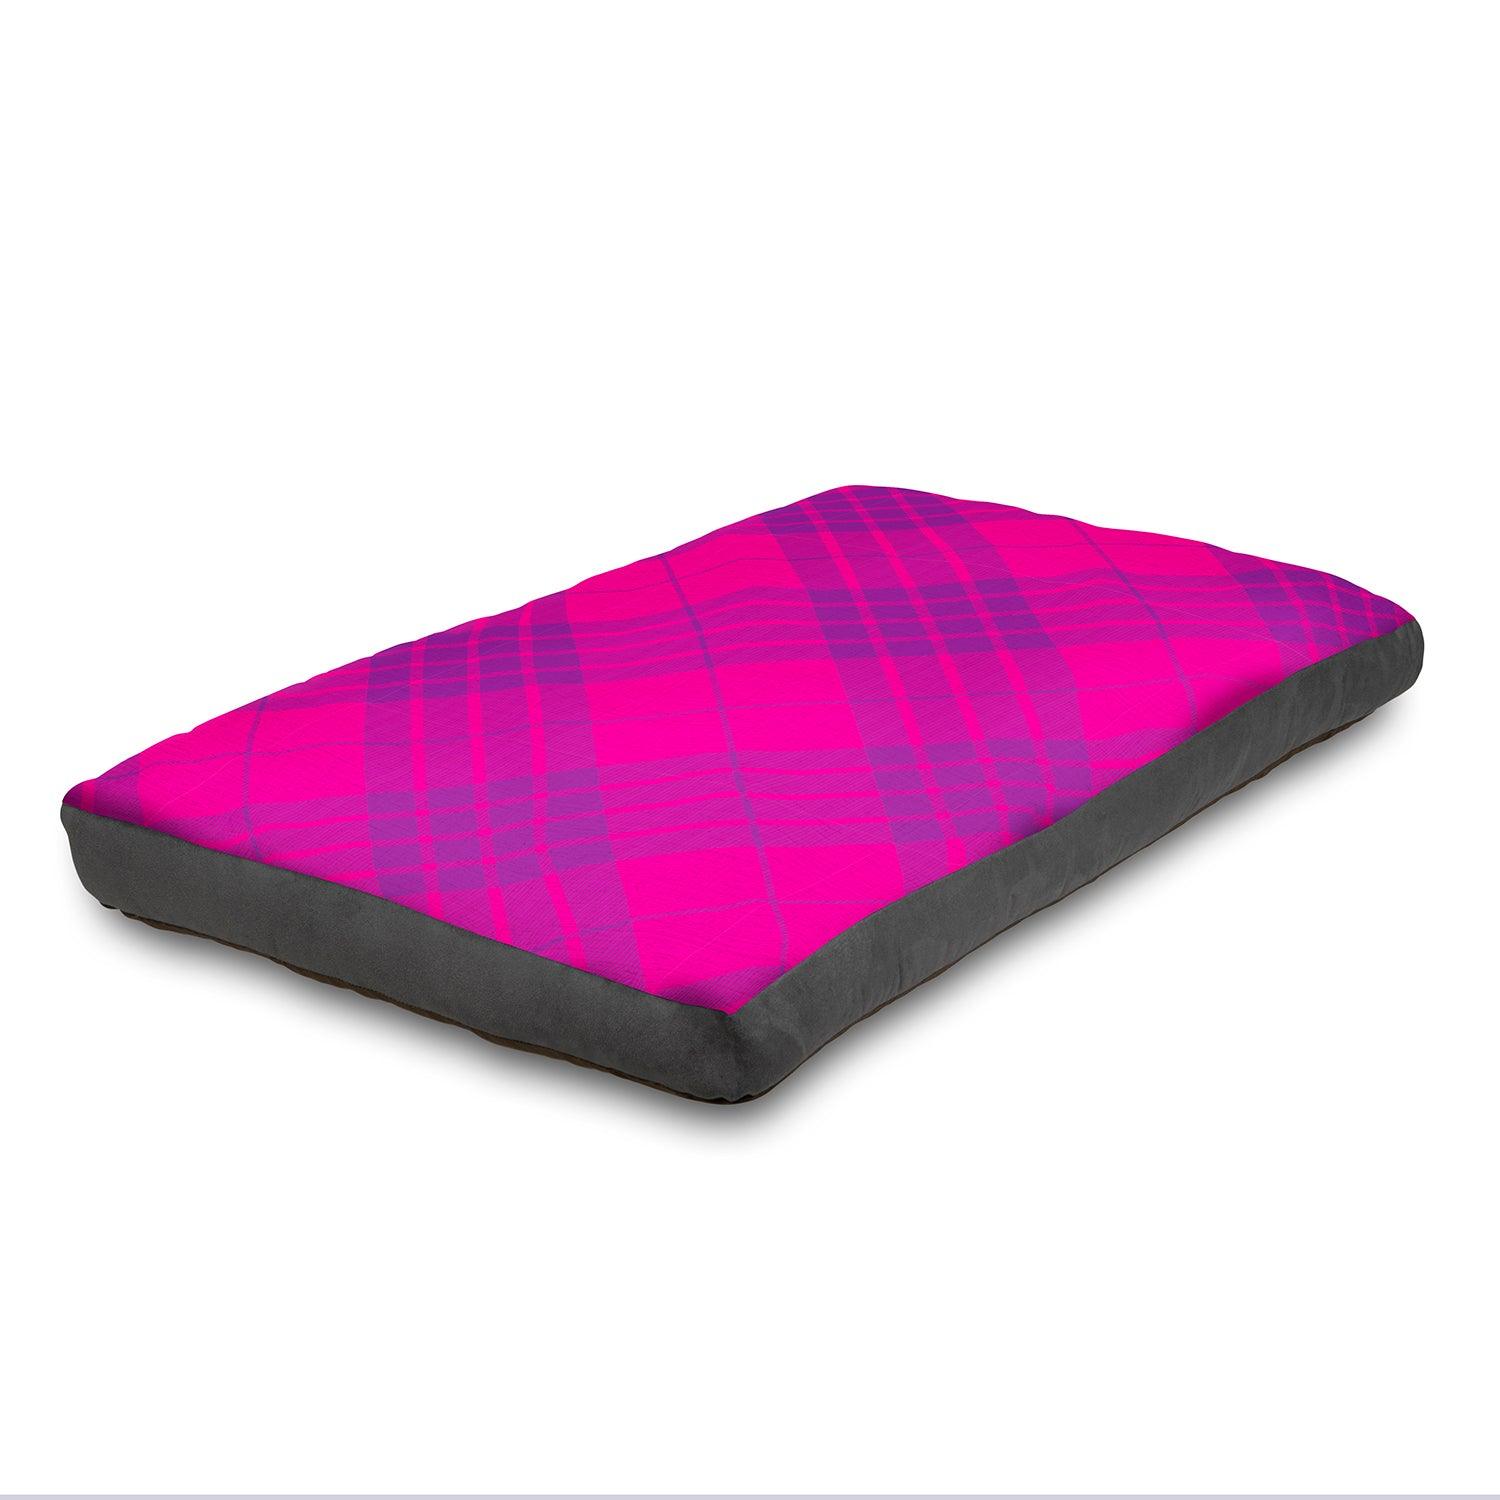 View Super Comfy Dog Bed Soft and Fluffy with Washable Cover XLarge 150 cm x 100 cm Pink information